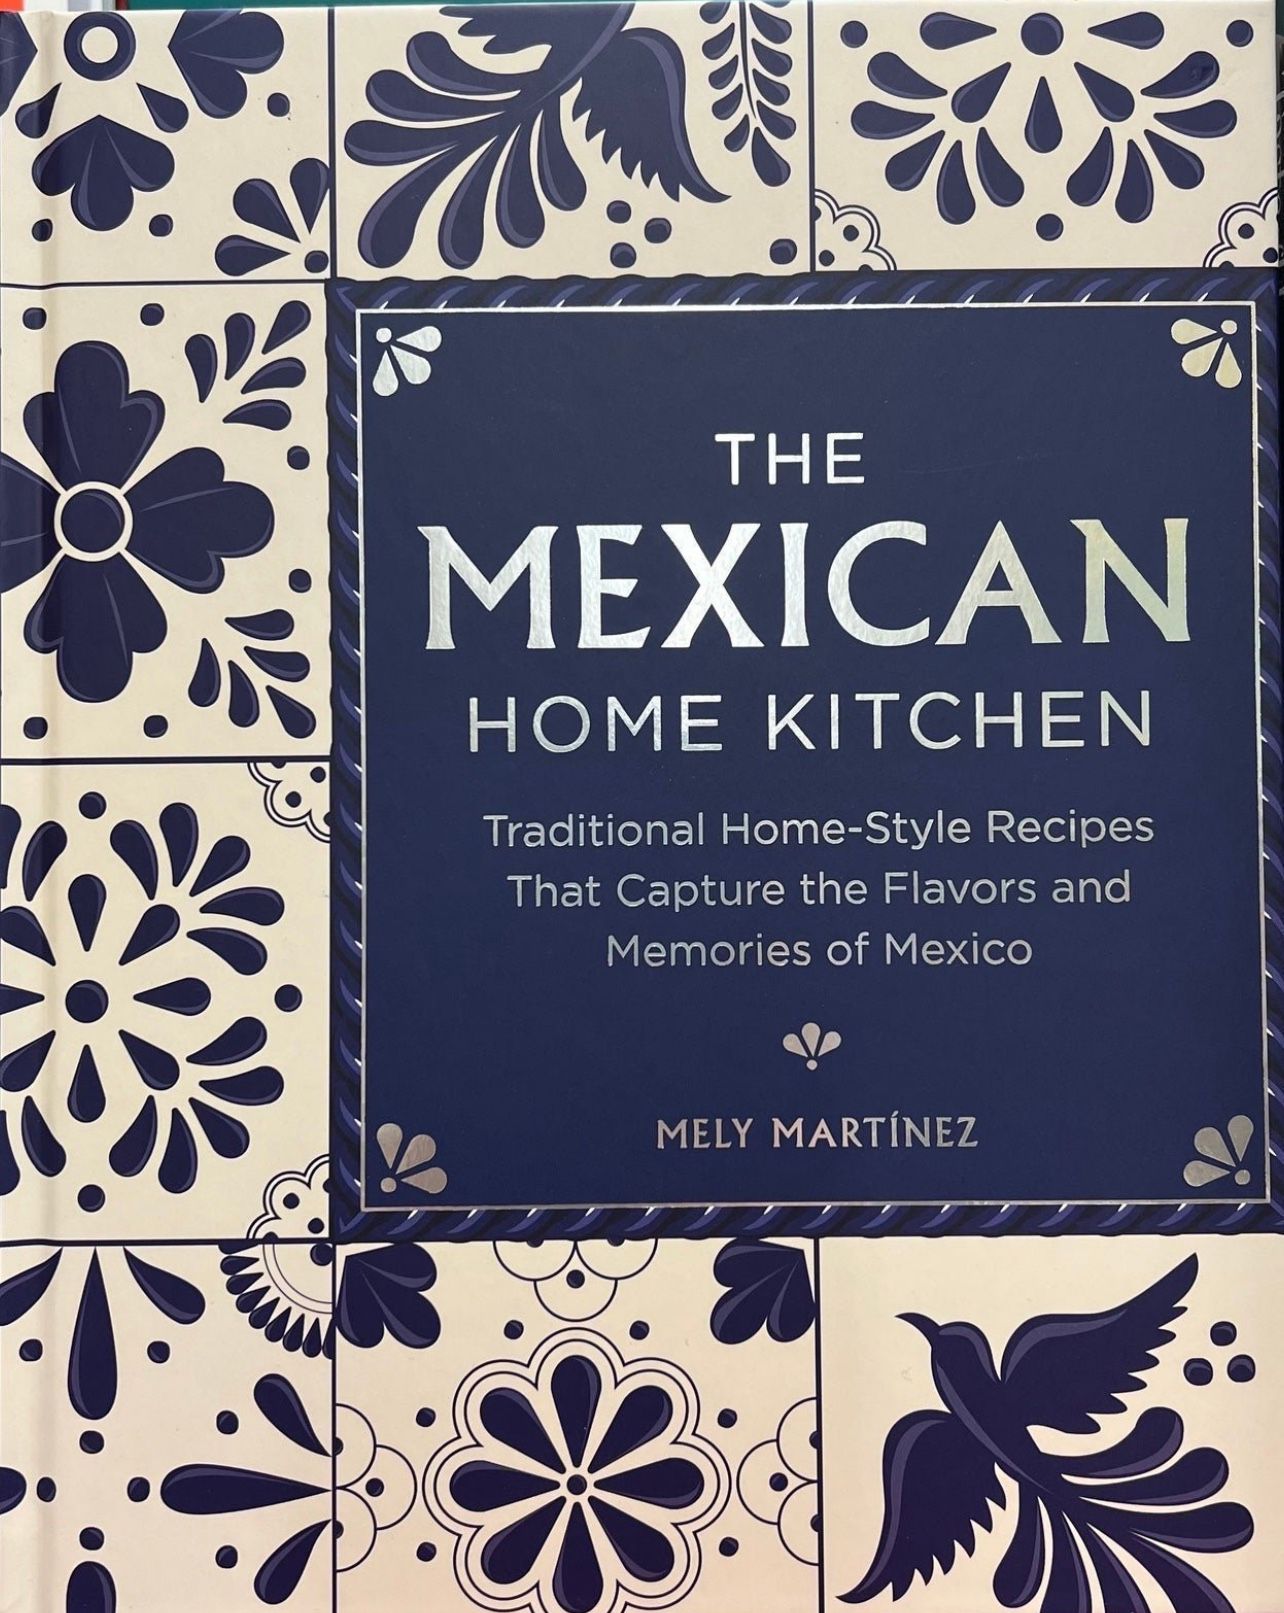 The Mexican Home Kitchen: Traditional Home-Style Recipes That Capture the Flavor